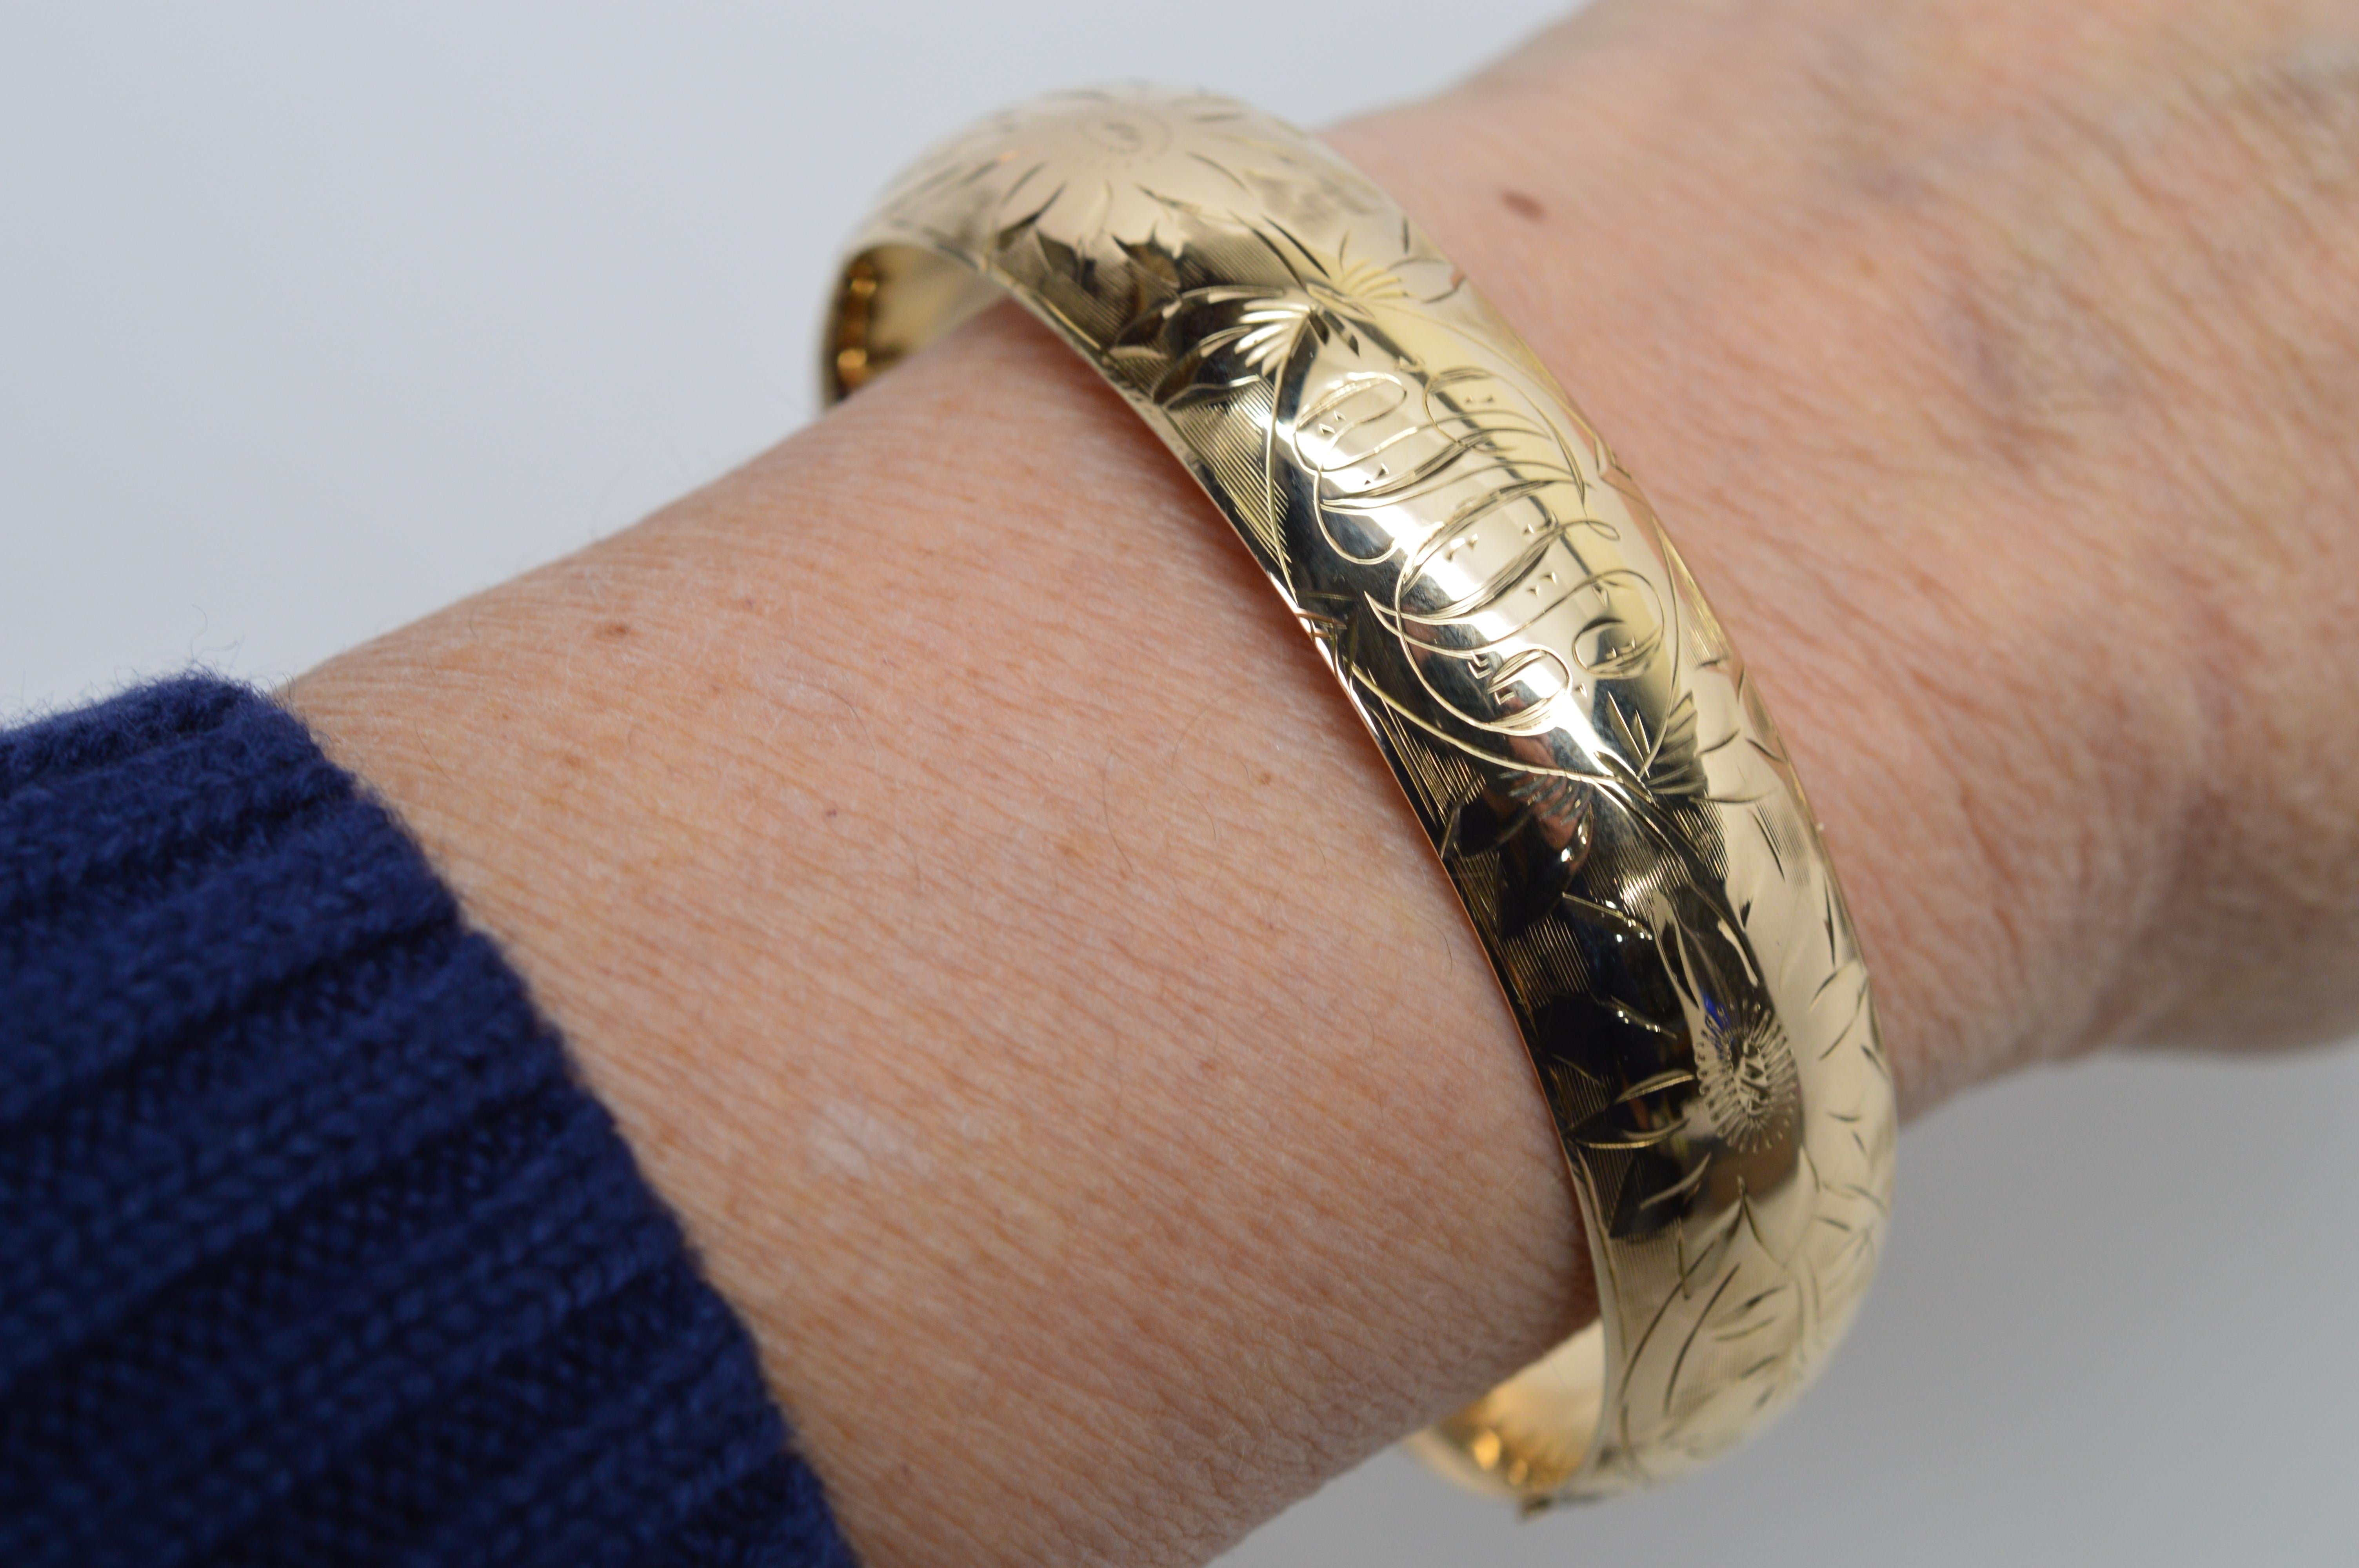 Hand engraving floral design and fancy script personalization adorn this antique fourteen karat 14K yellow gold bangle bracelet dated 1916, and signed by the maker of the period G&B. At 3/4 inch wide, the band of the bracelet has an engraved front